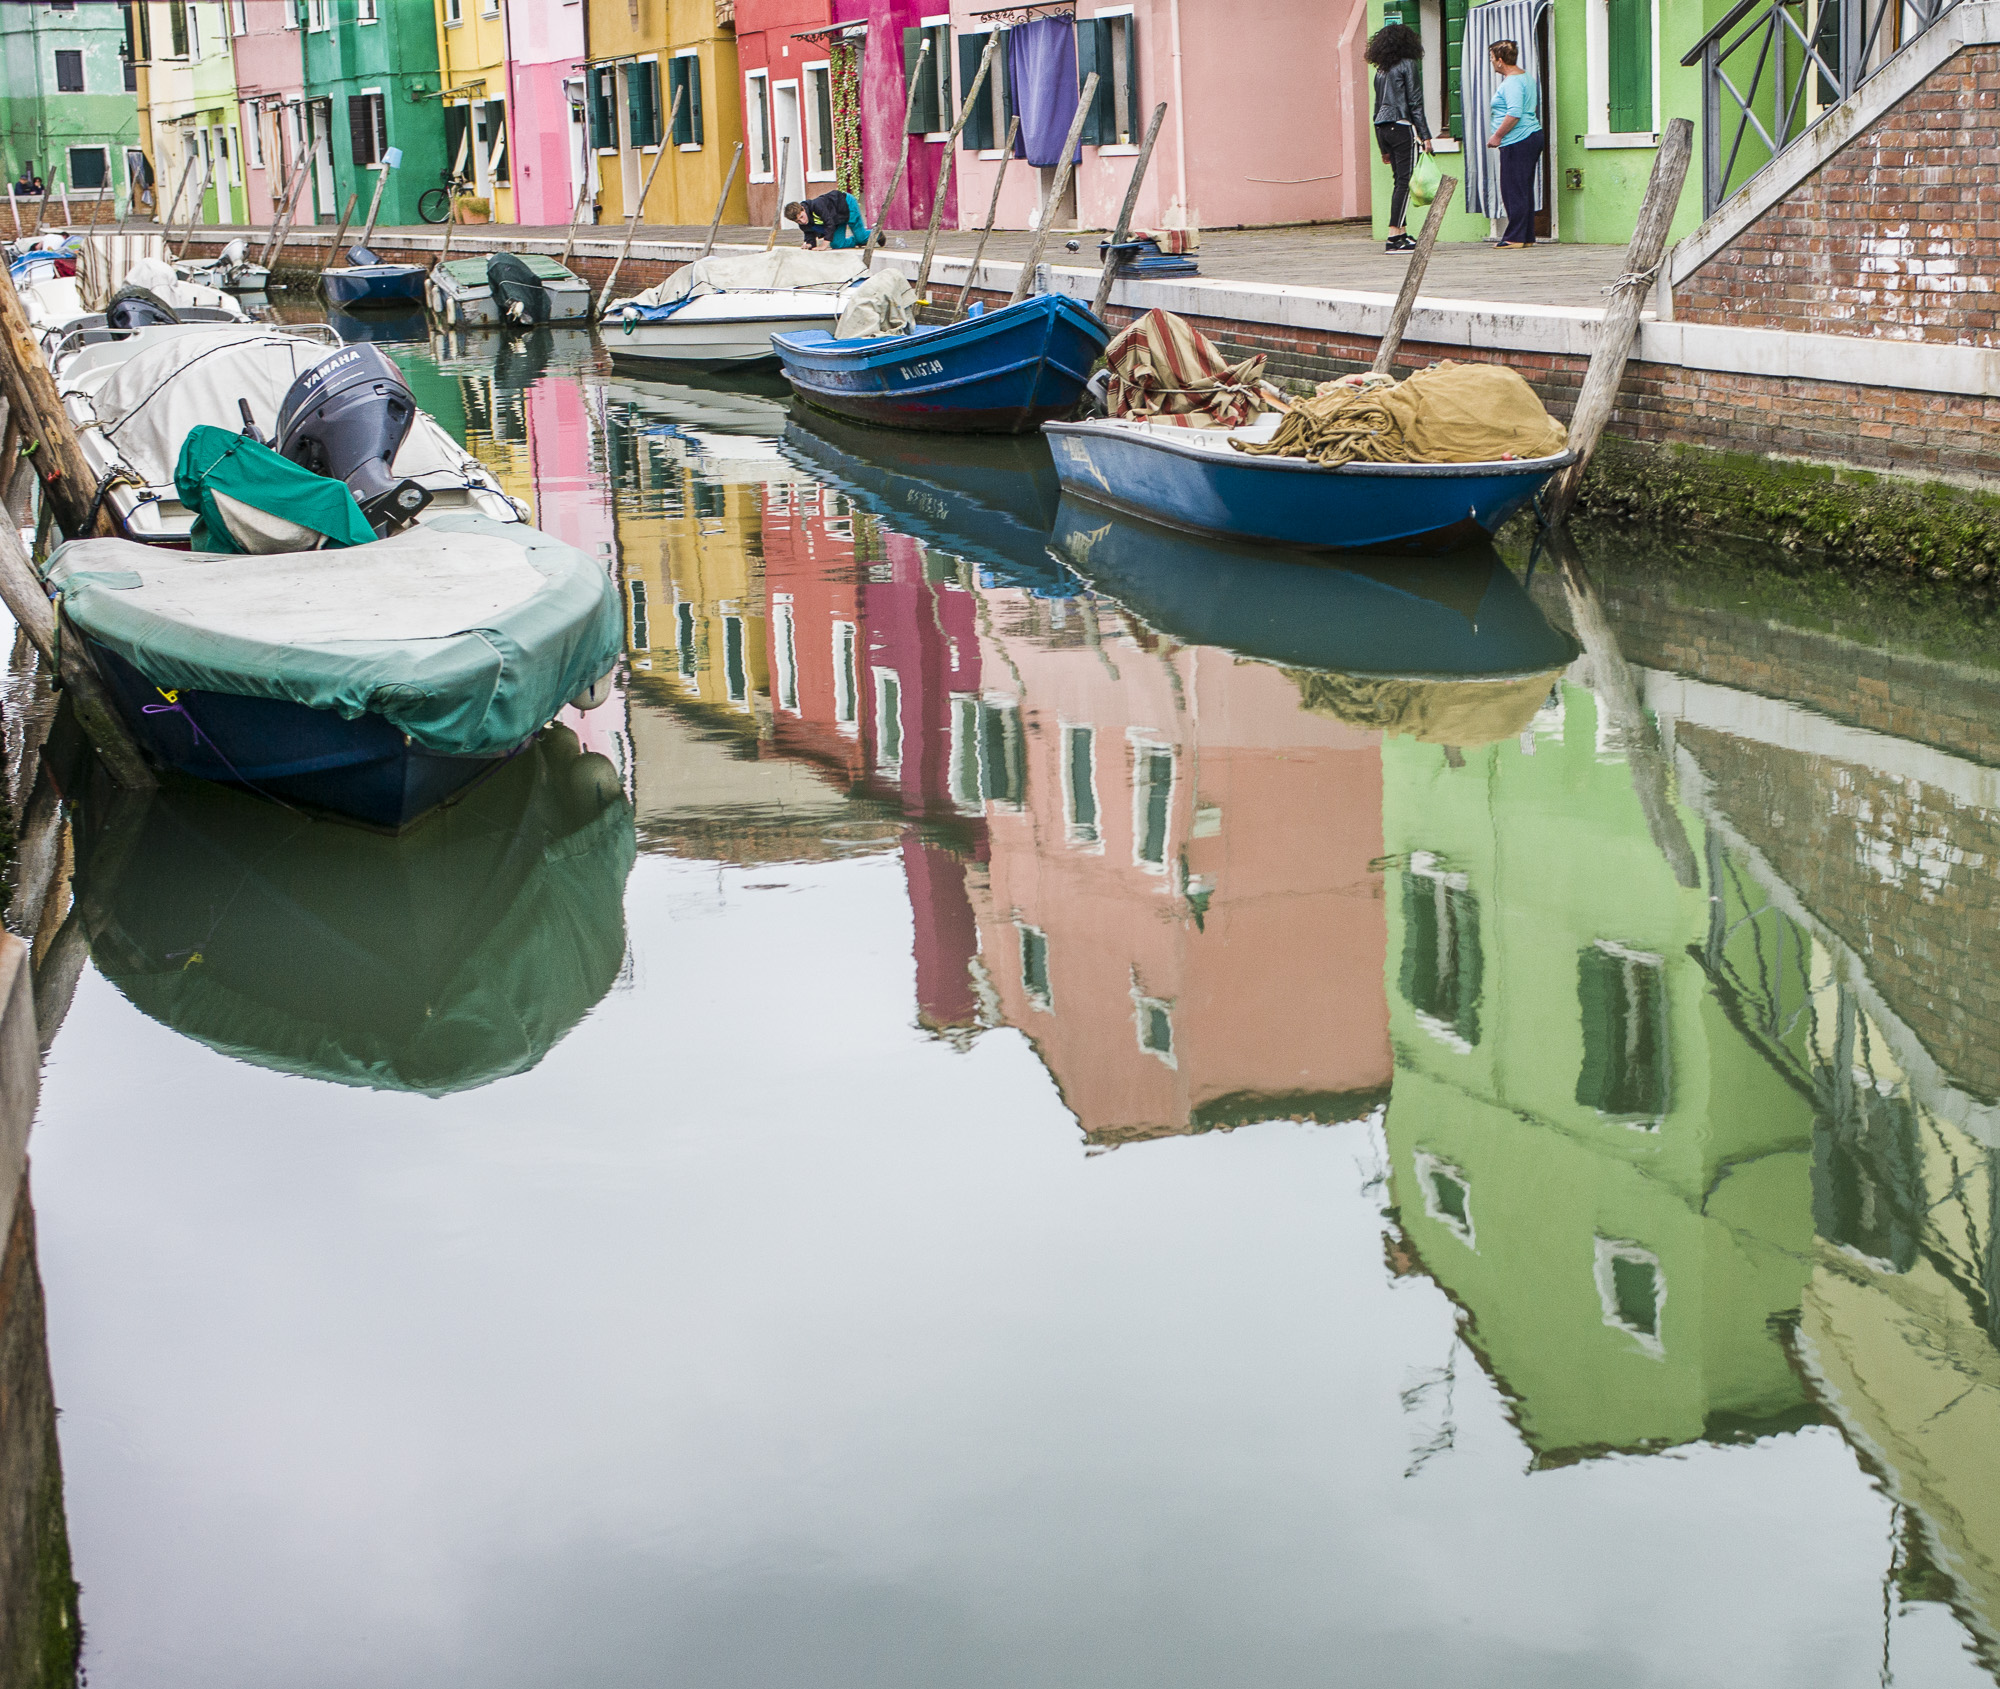 Reflection in Burano